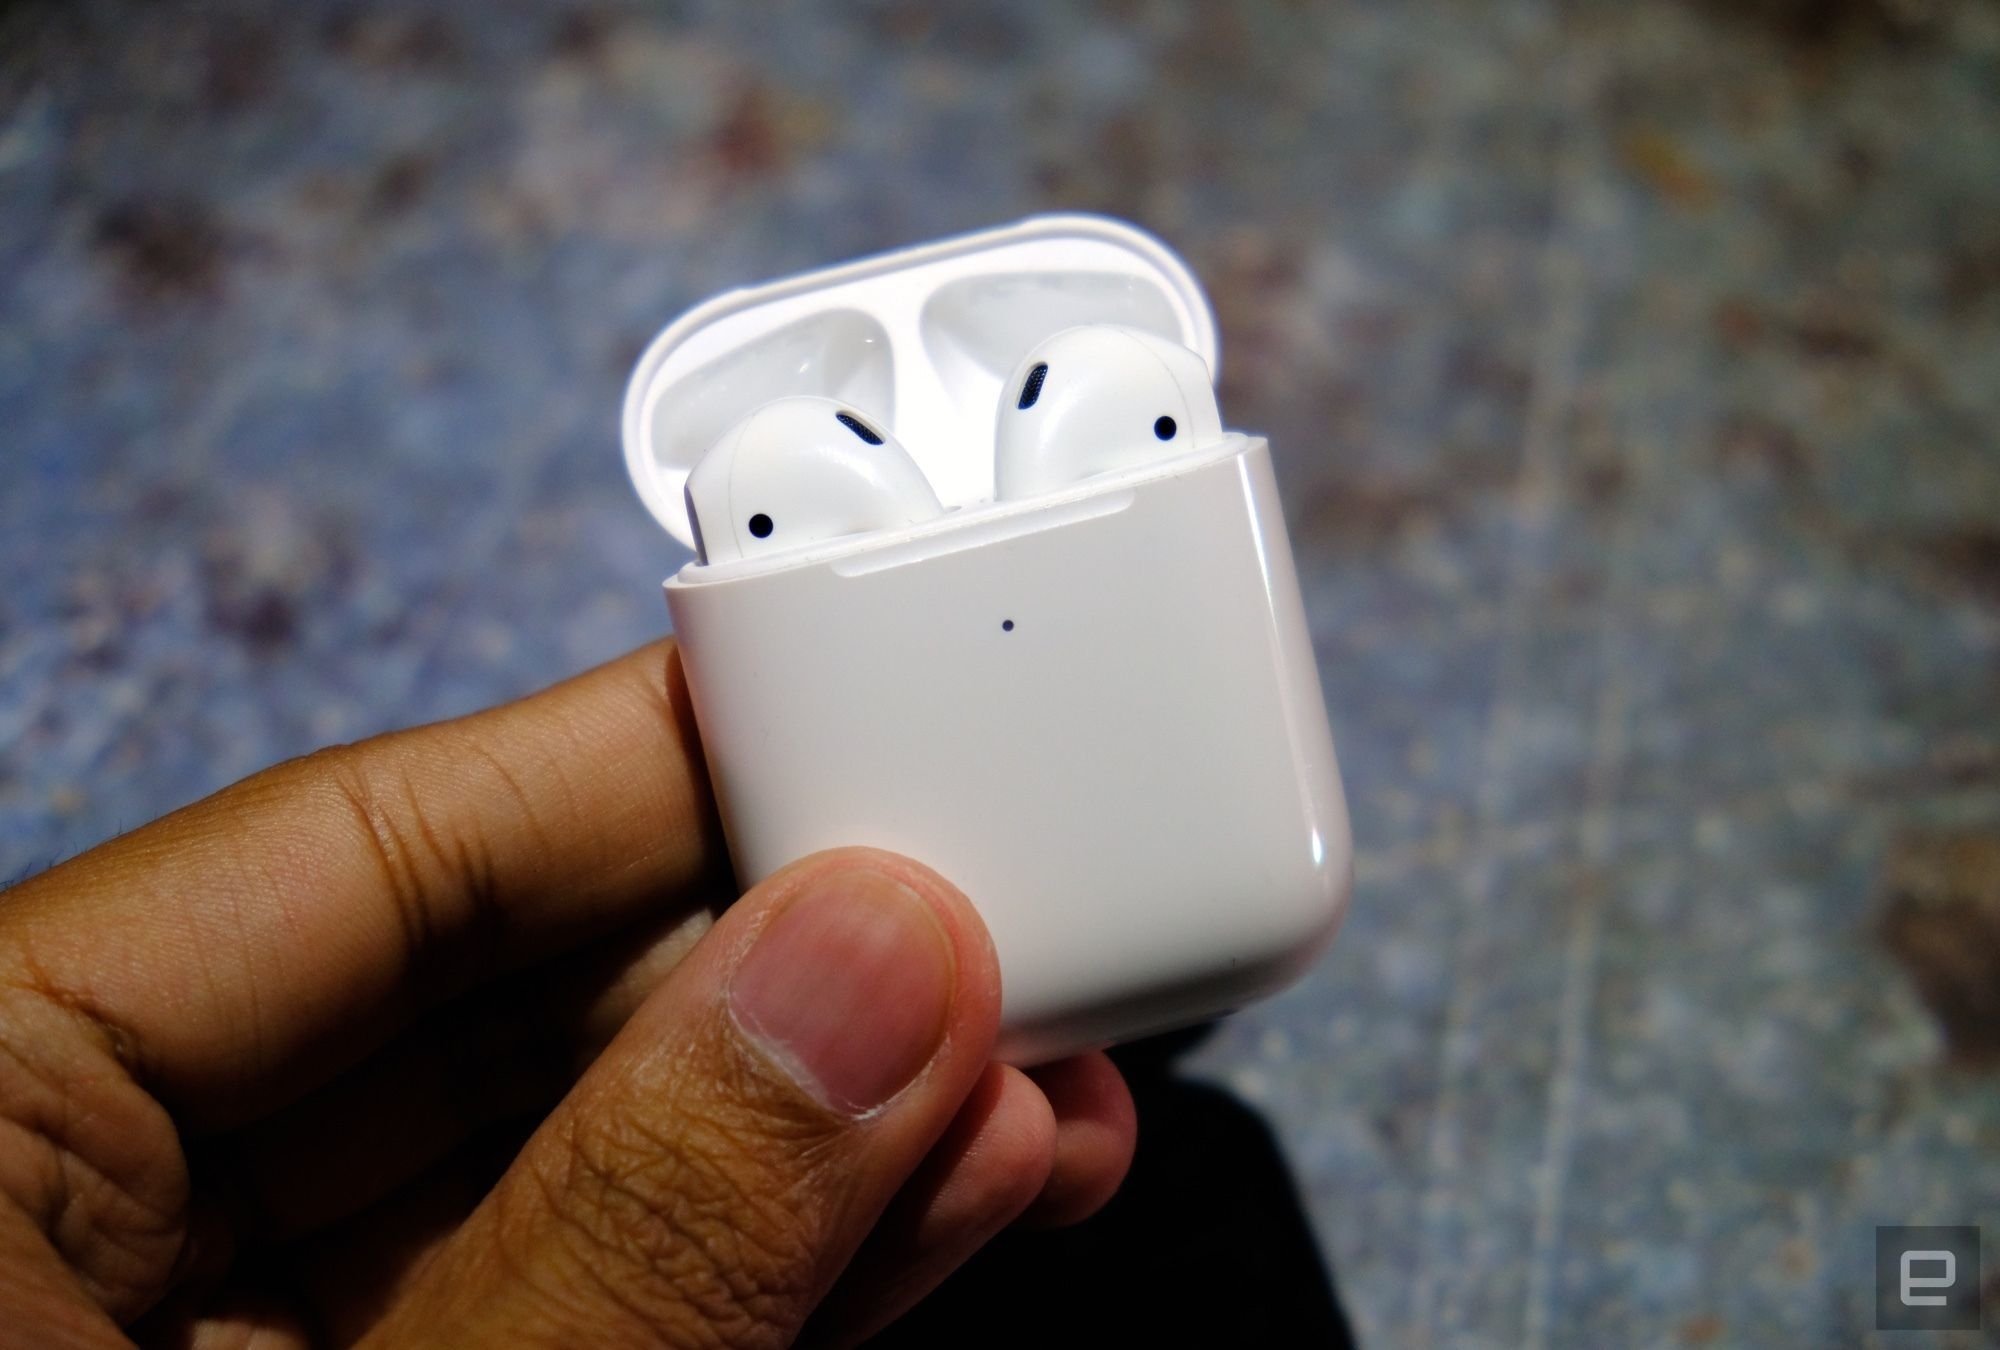 Apple's latest AirPods drop to $140, plus the rest of the week's best tech deals | DeviceDaily.com